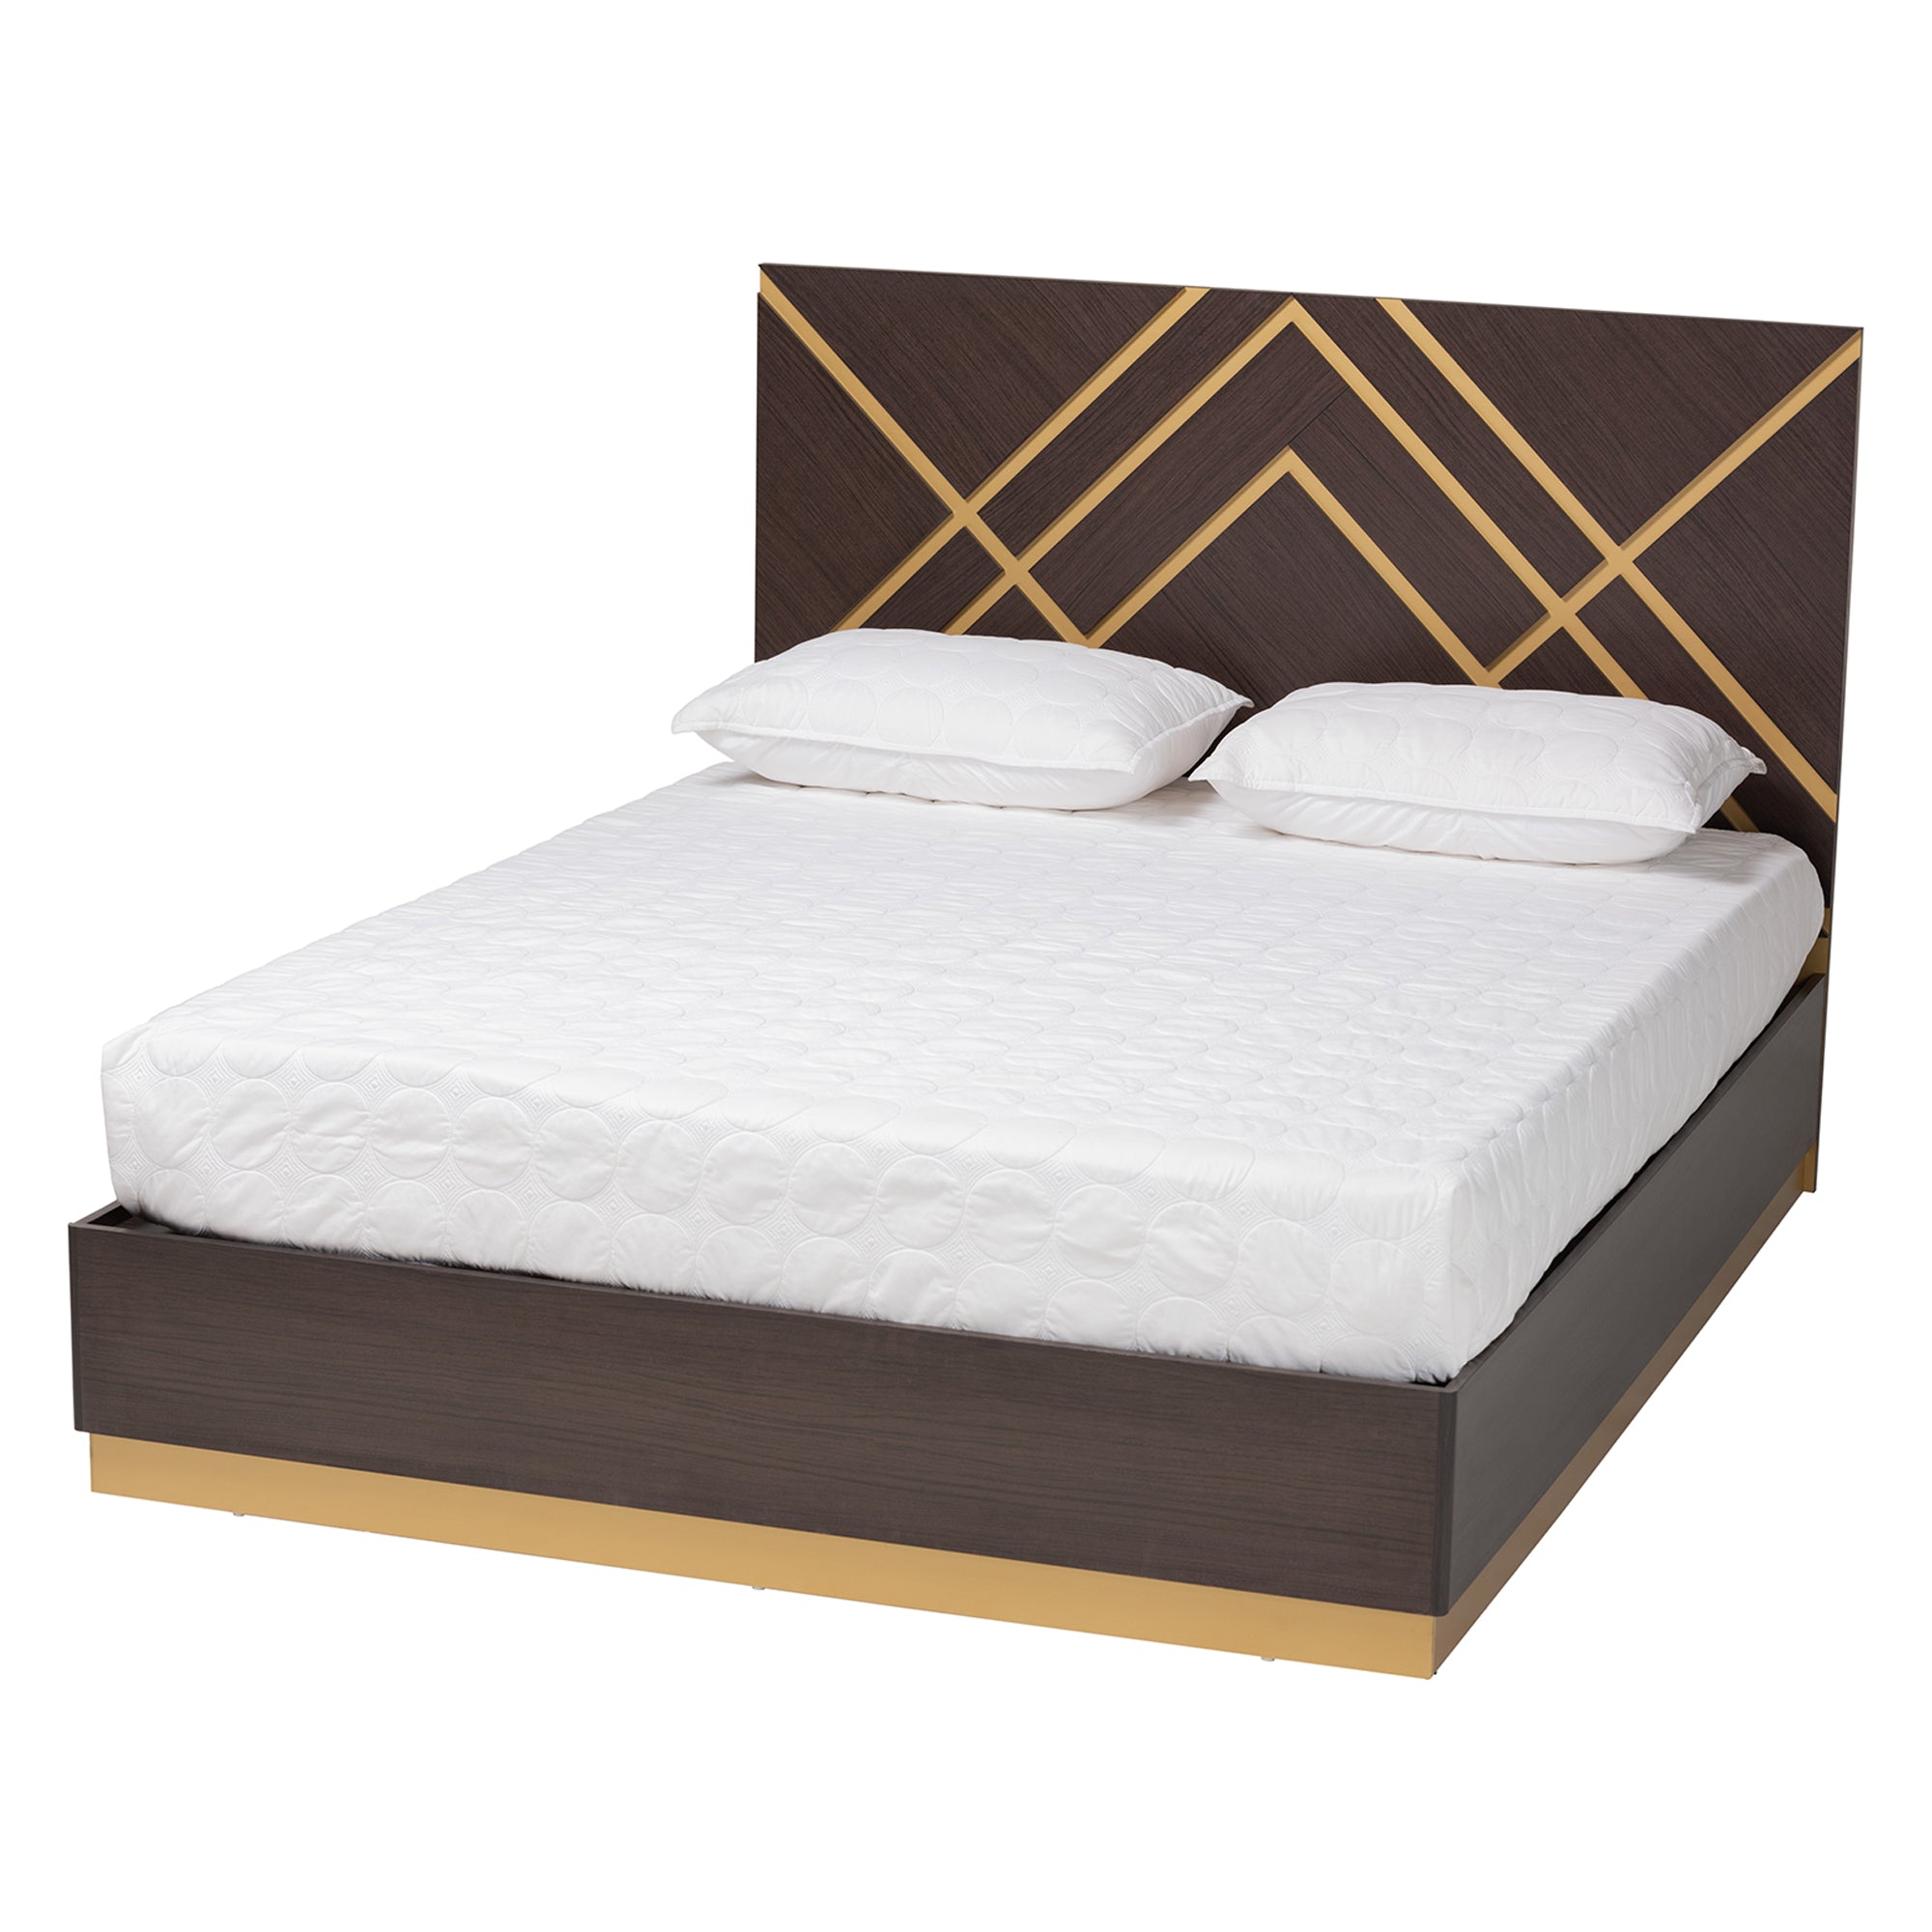 Arcelia Contemporary Bed & Nightstands Two-Tone 3-Piece-Bedroom Set-Baxton Studio - WI-Wall2Wall Furnishings